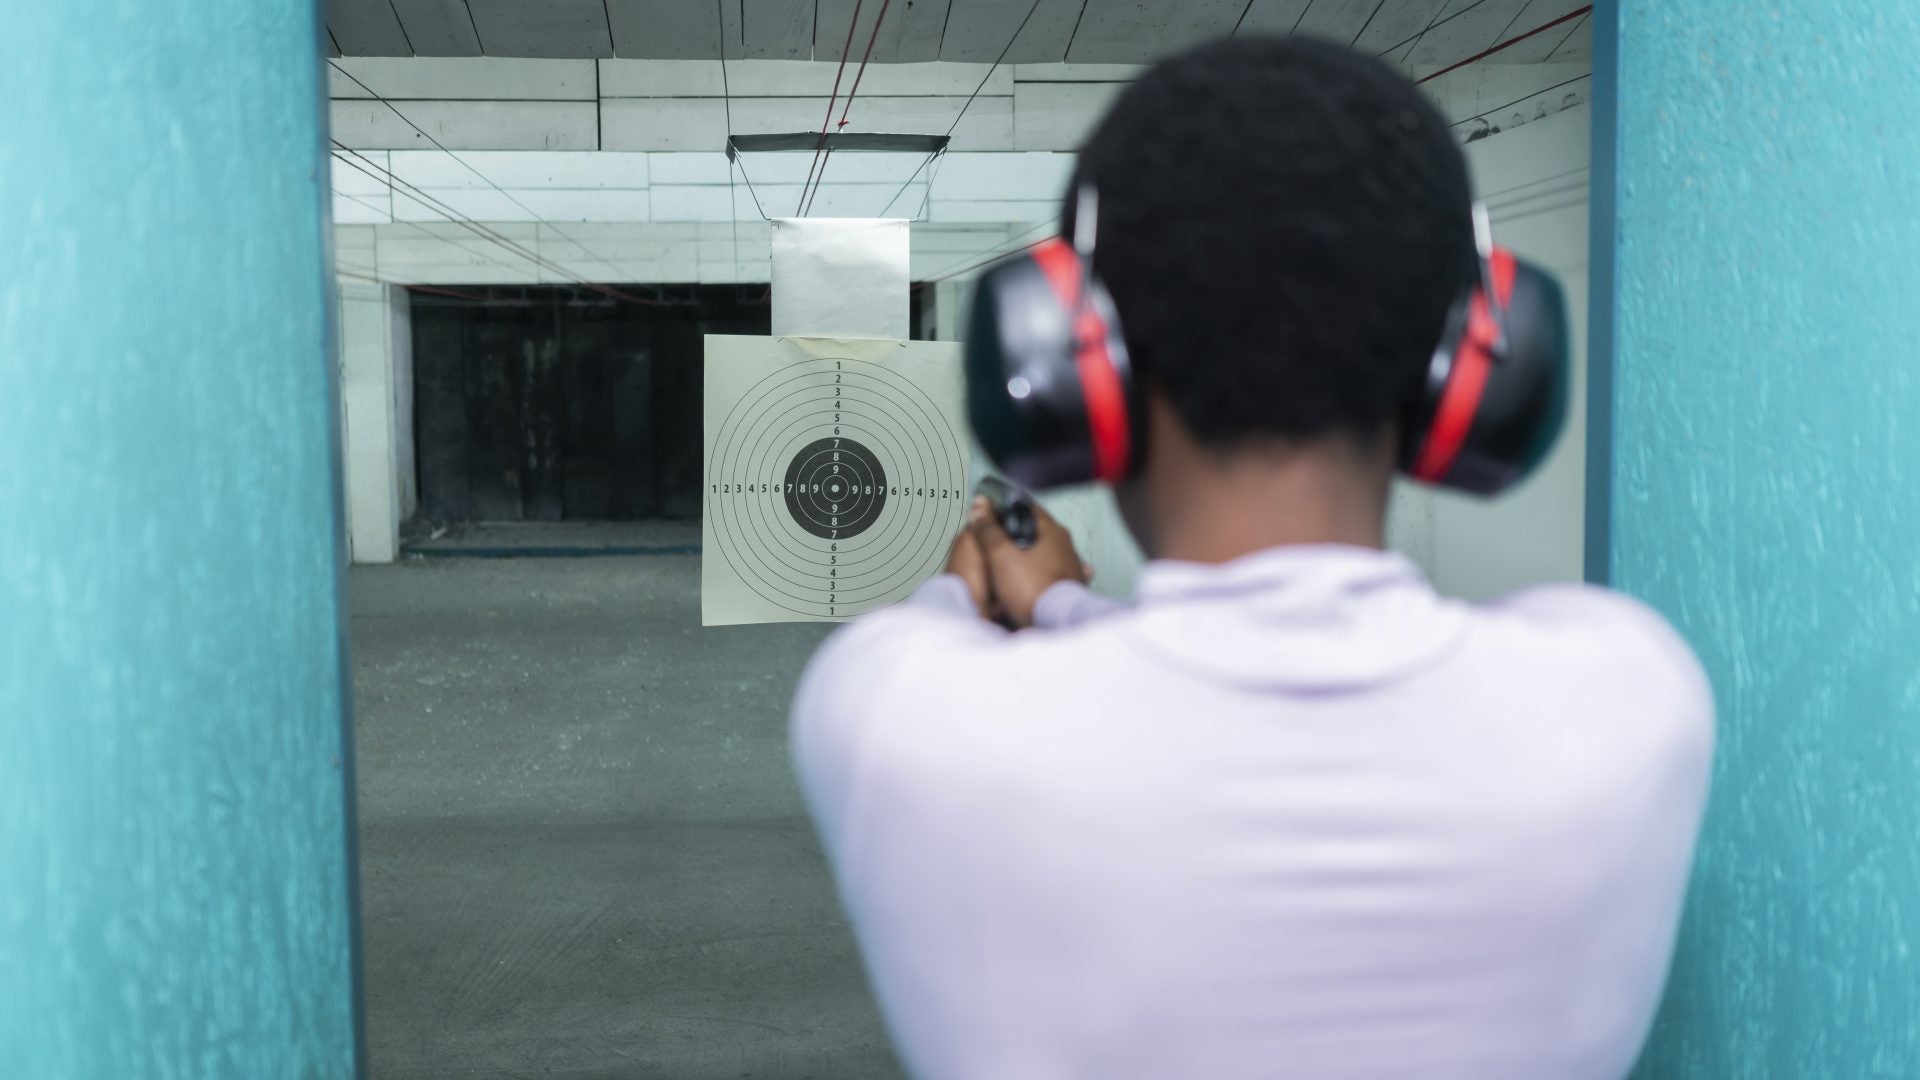 Black Women Are The Fastest-Growing Group of Gun Owners